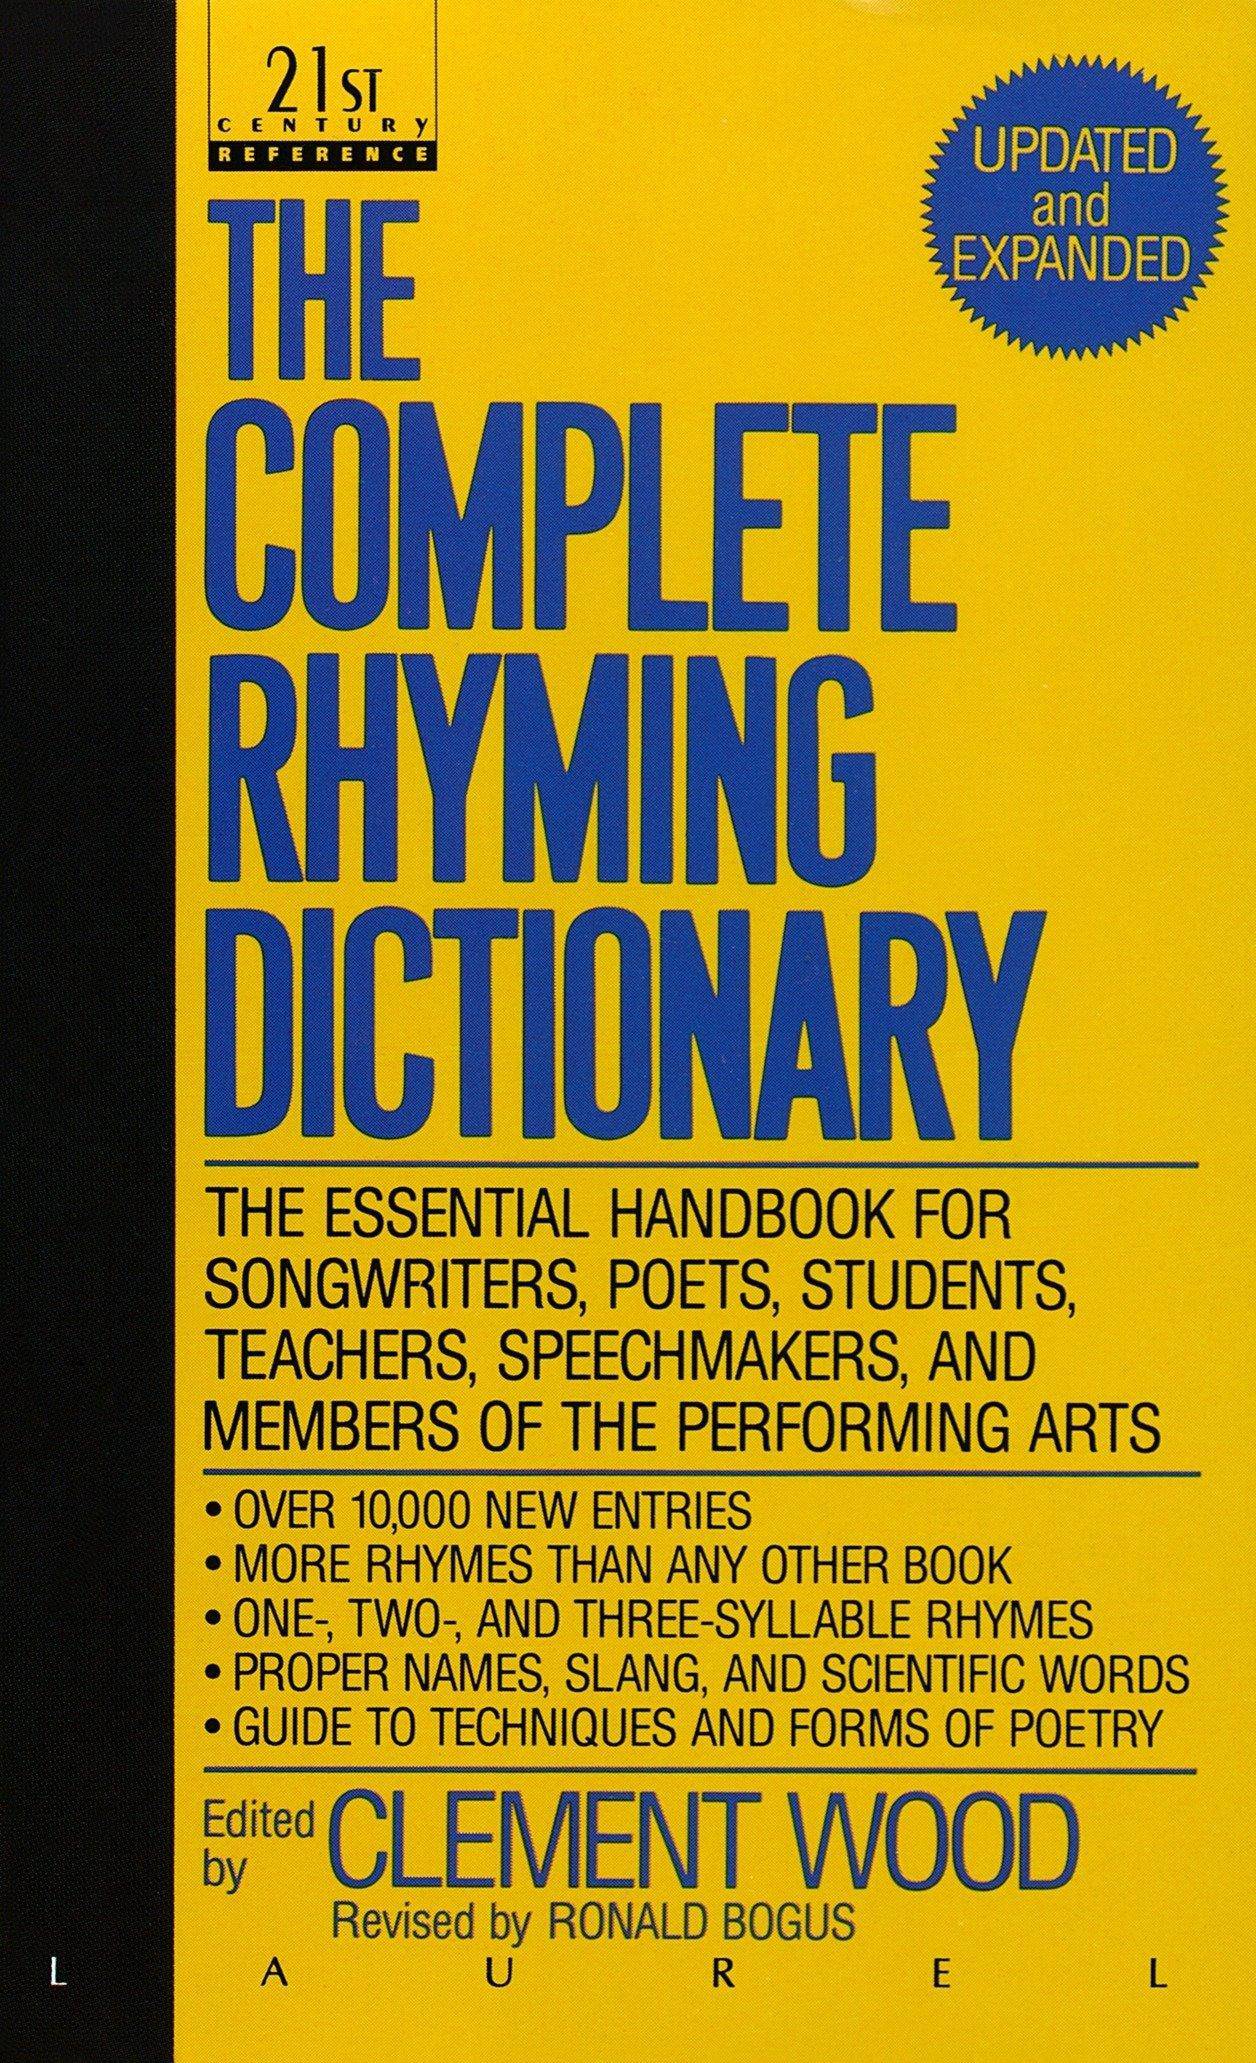 The Complete Rhyming Dictionary - SureShot Books Publishing LLC